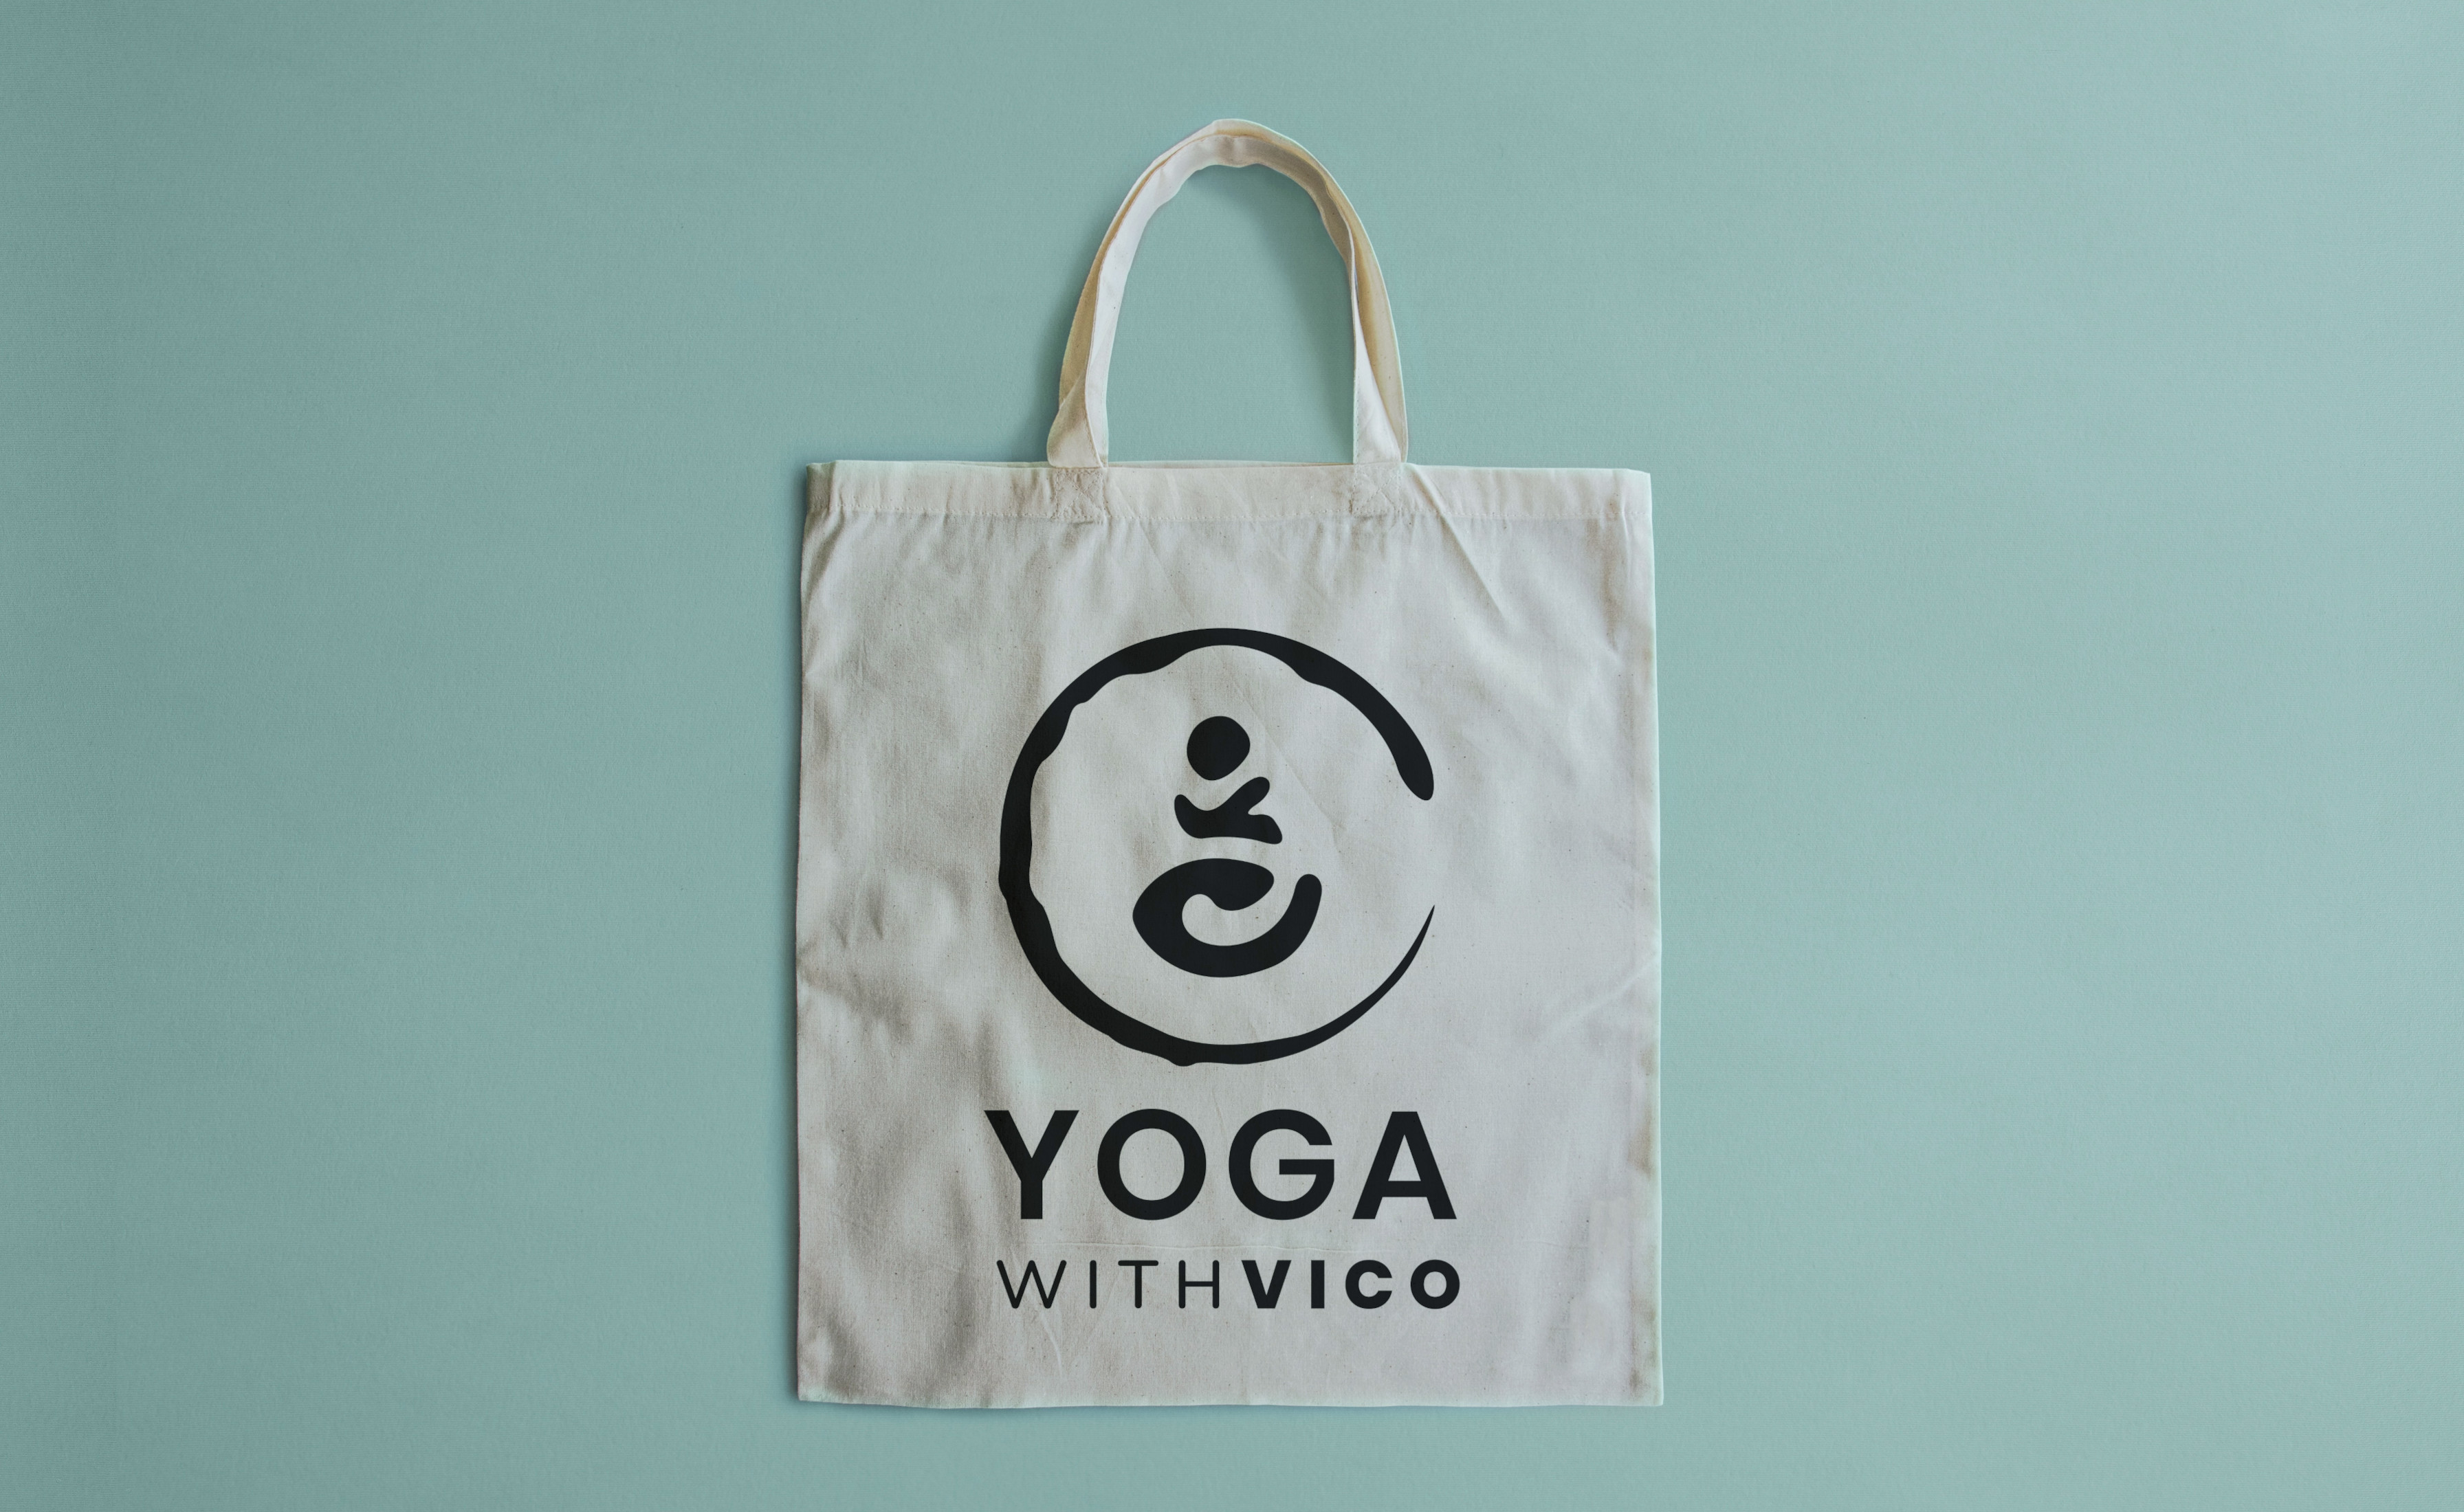 Yoga with Vico's square logo design shown on a natural fibre tote bag. Background is plain and light aquamarine colored.
